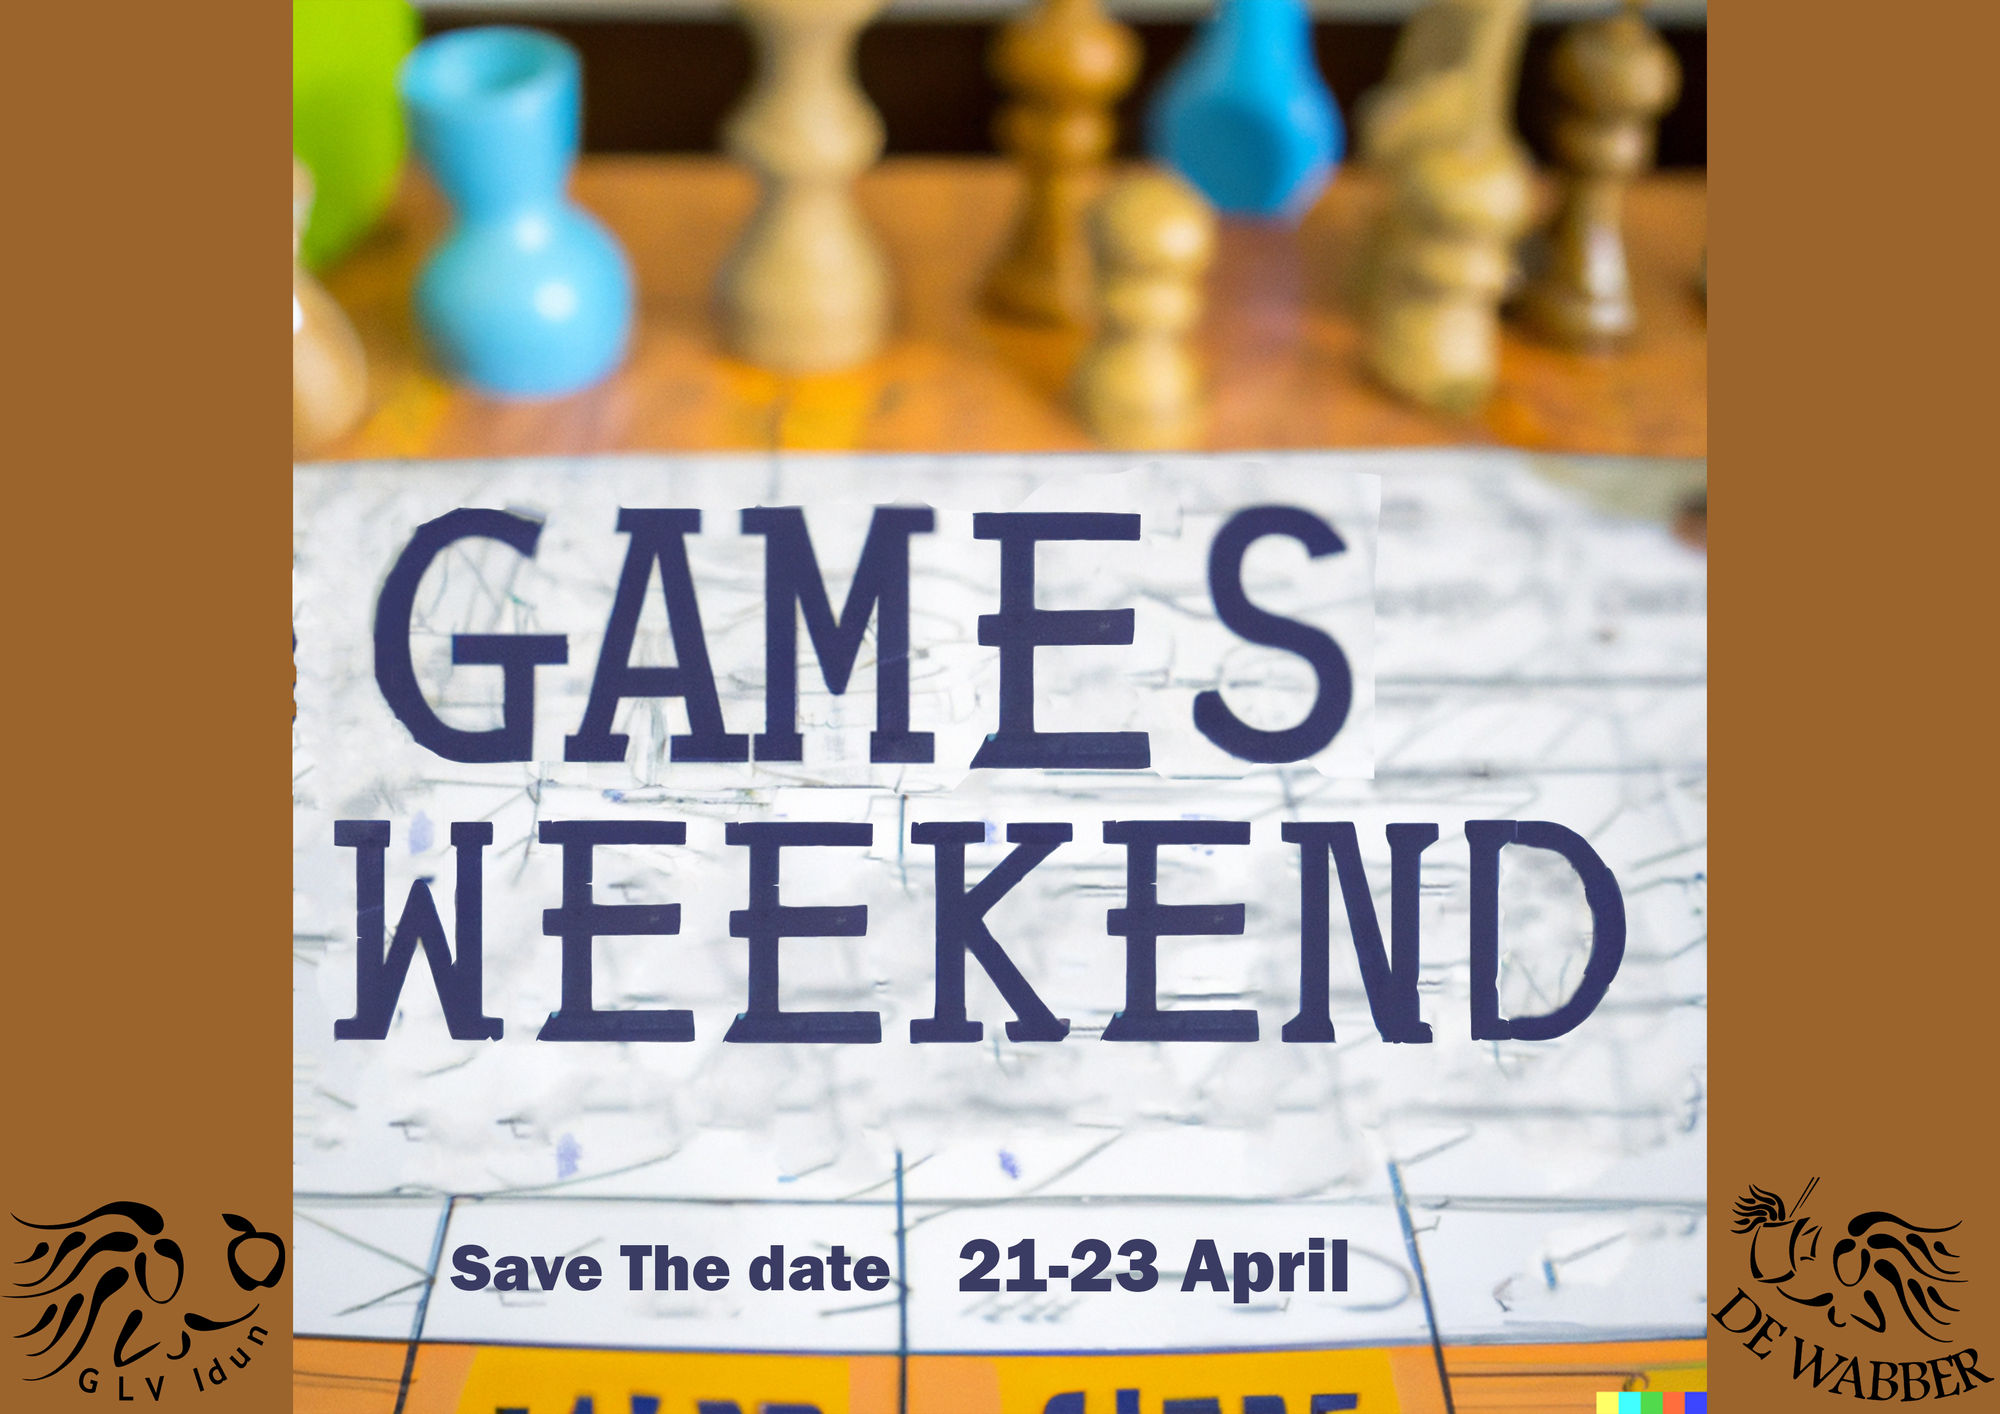 Save the date: Games Weekend